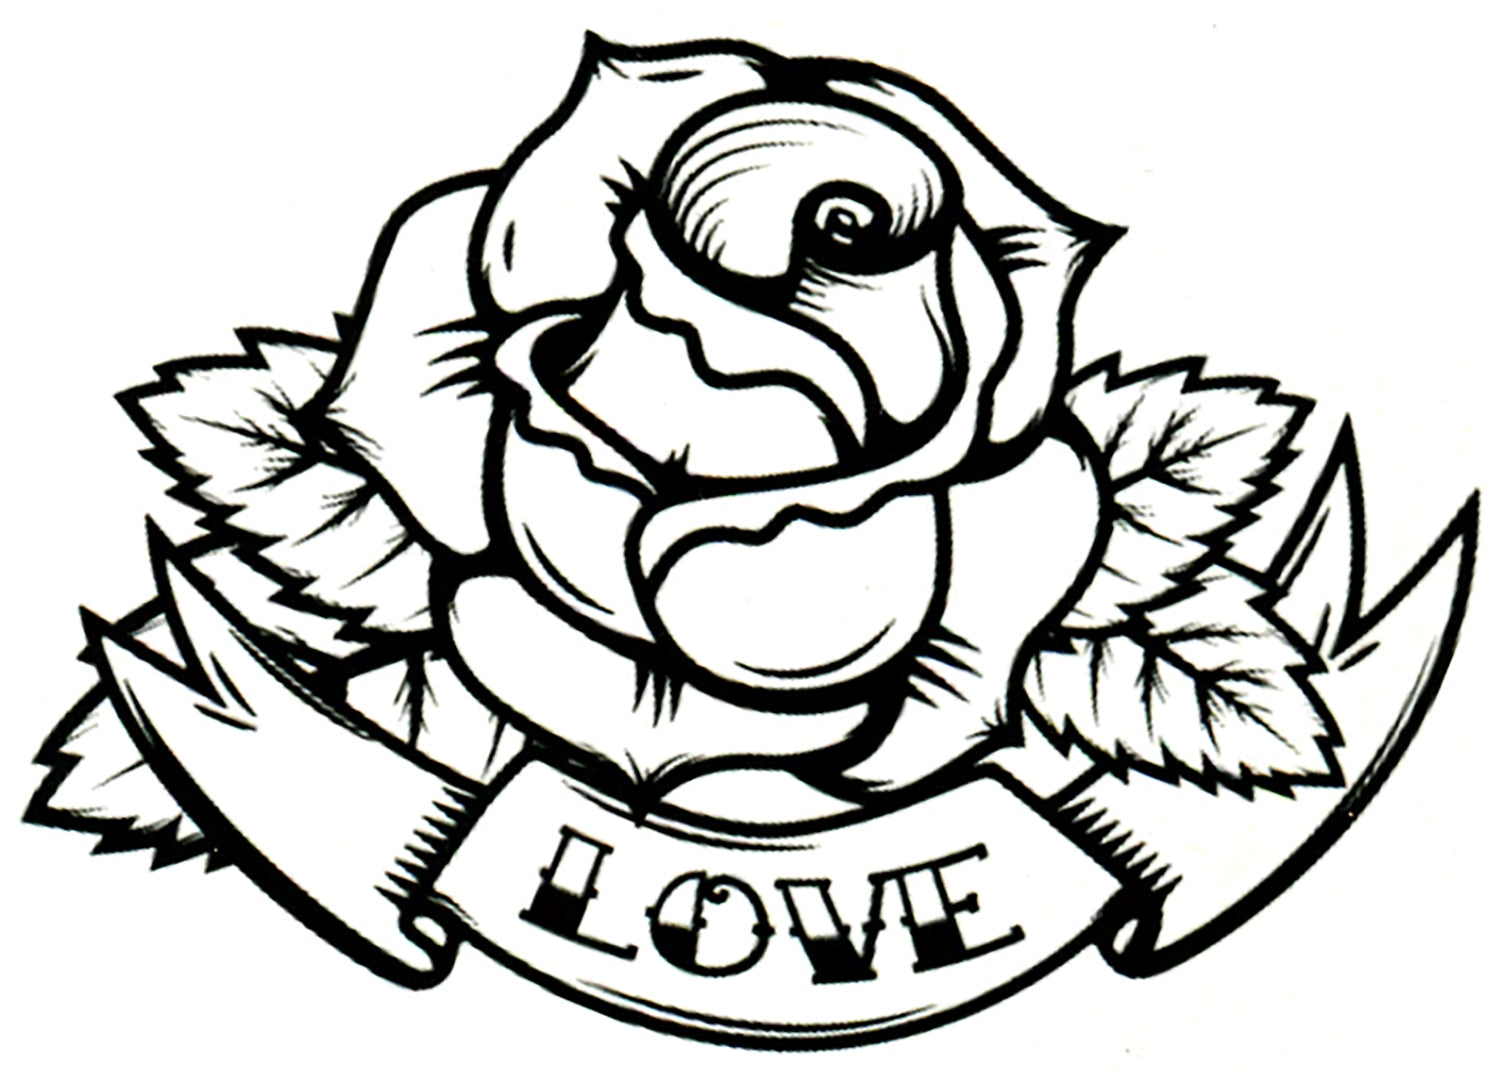 Love Rose Banner Classic Black Waterproof Temporary Tattoos 2 Sheets